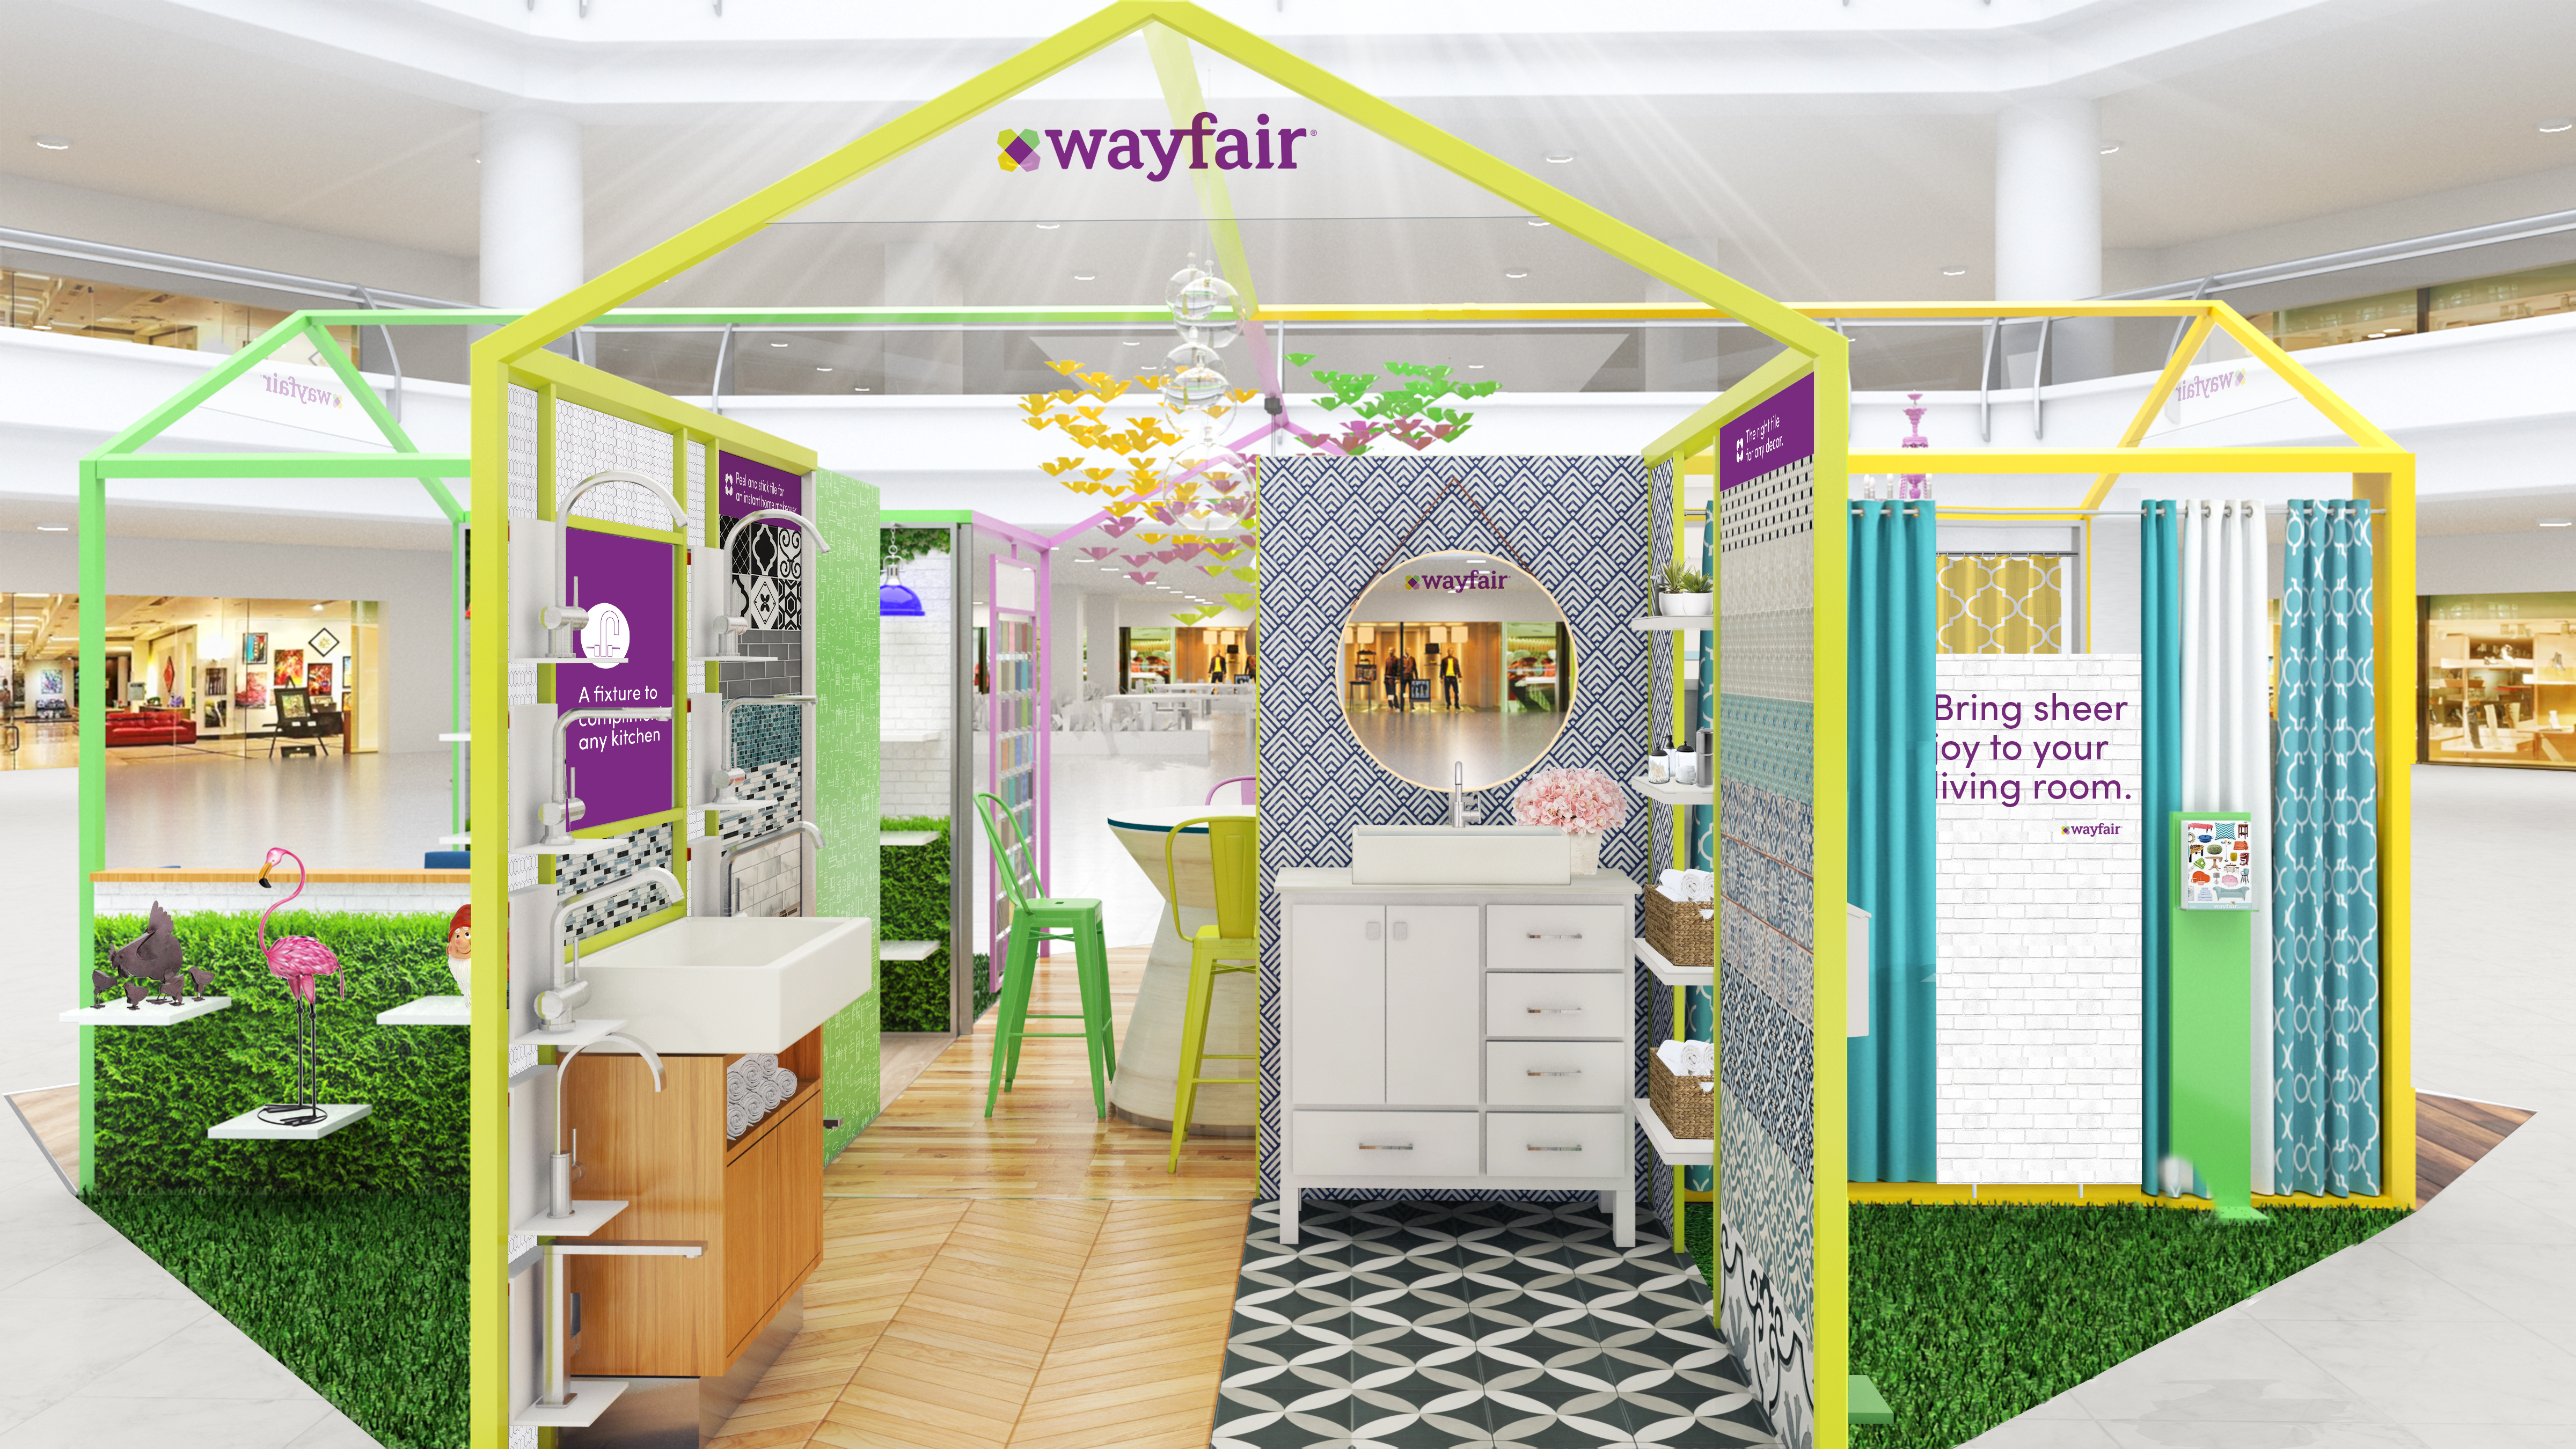 fjerkræ Sorg statisk Wayfair to Launch Pop-Up Retail Experience for the Holiday Season |  Business Wire